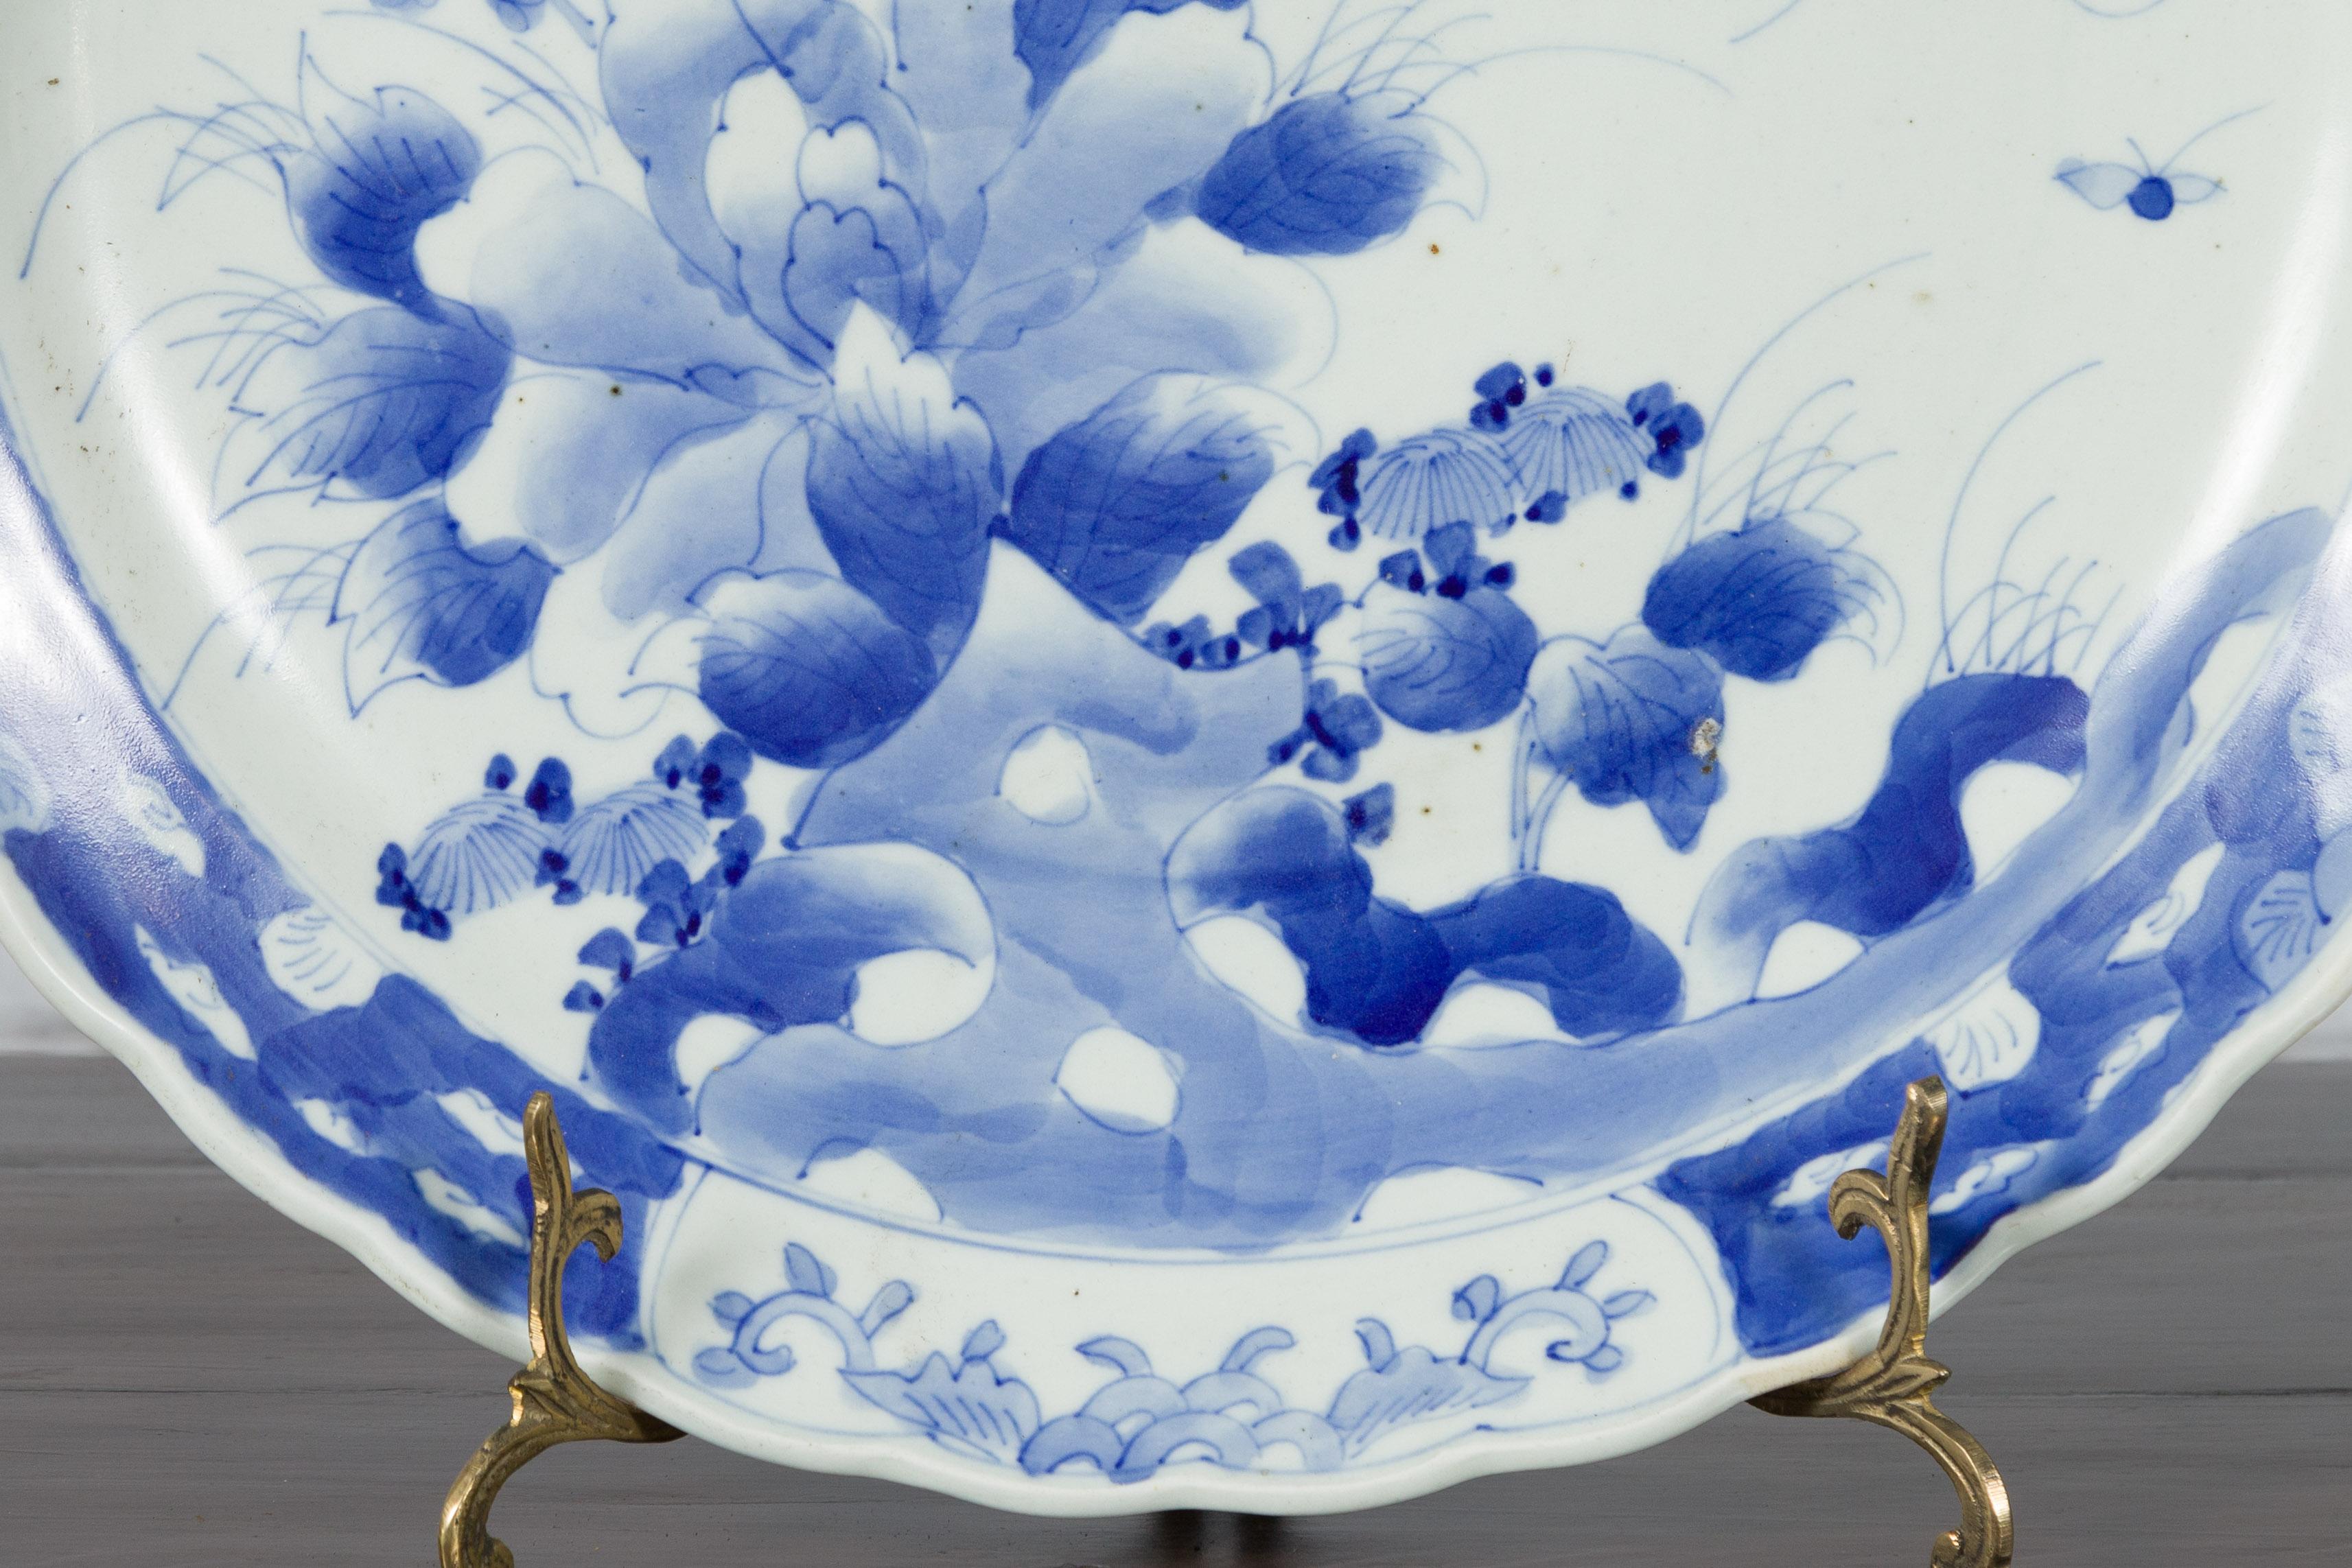 19th Century Japanese Porcelain Imari Plate with Painted Blue and White Décor In Good Condition For Sale In Yonkers, NY